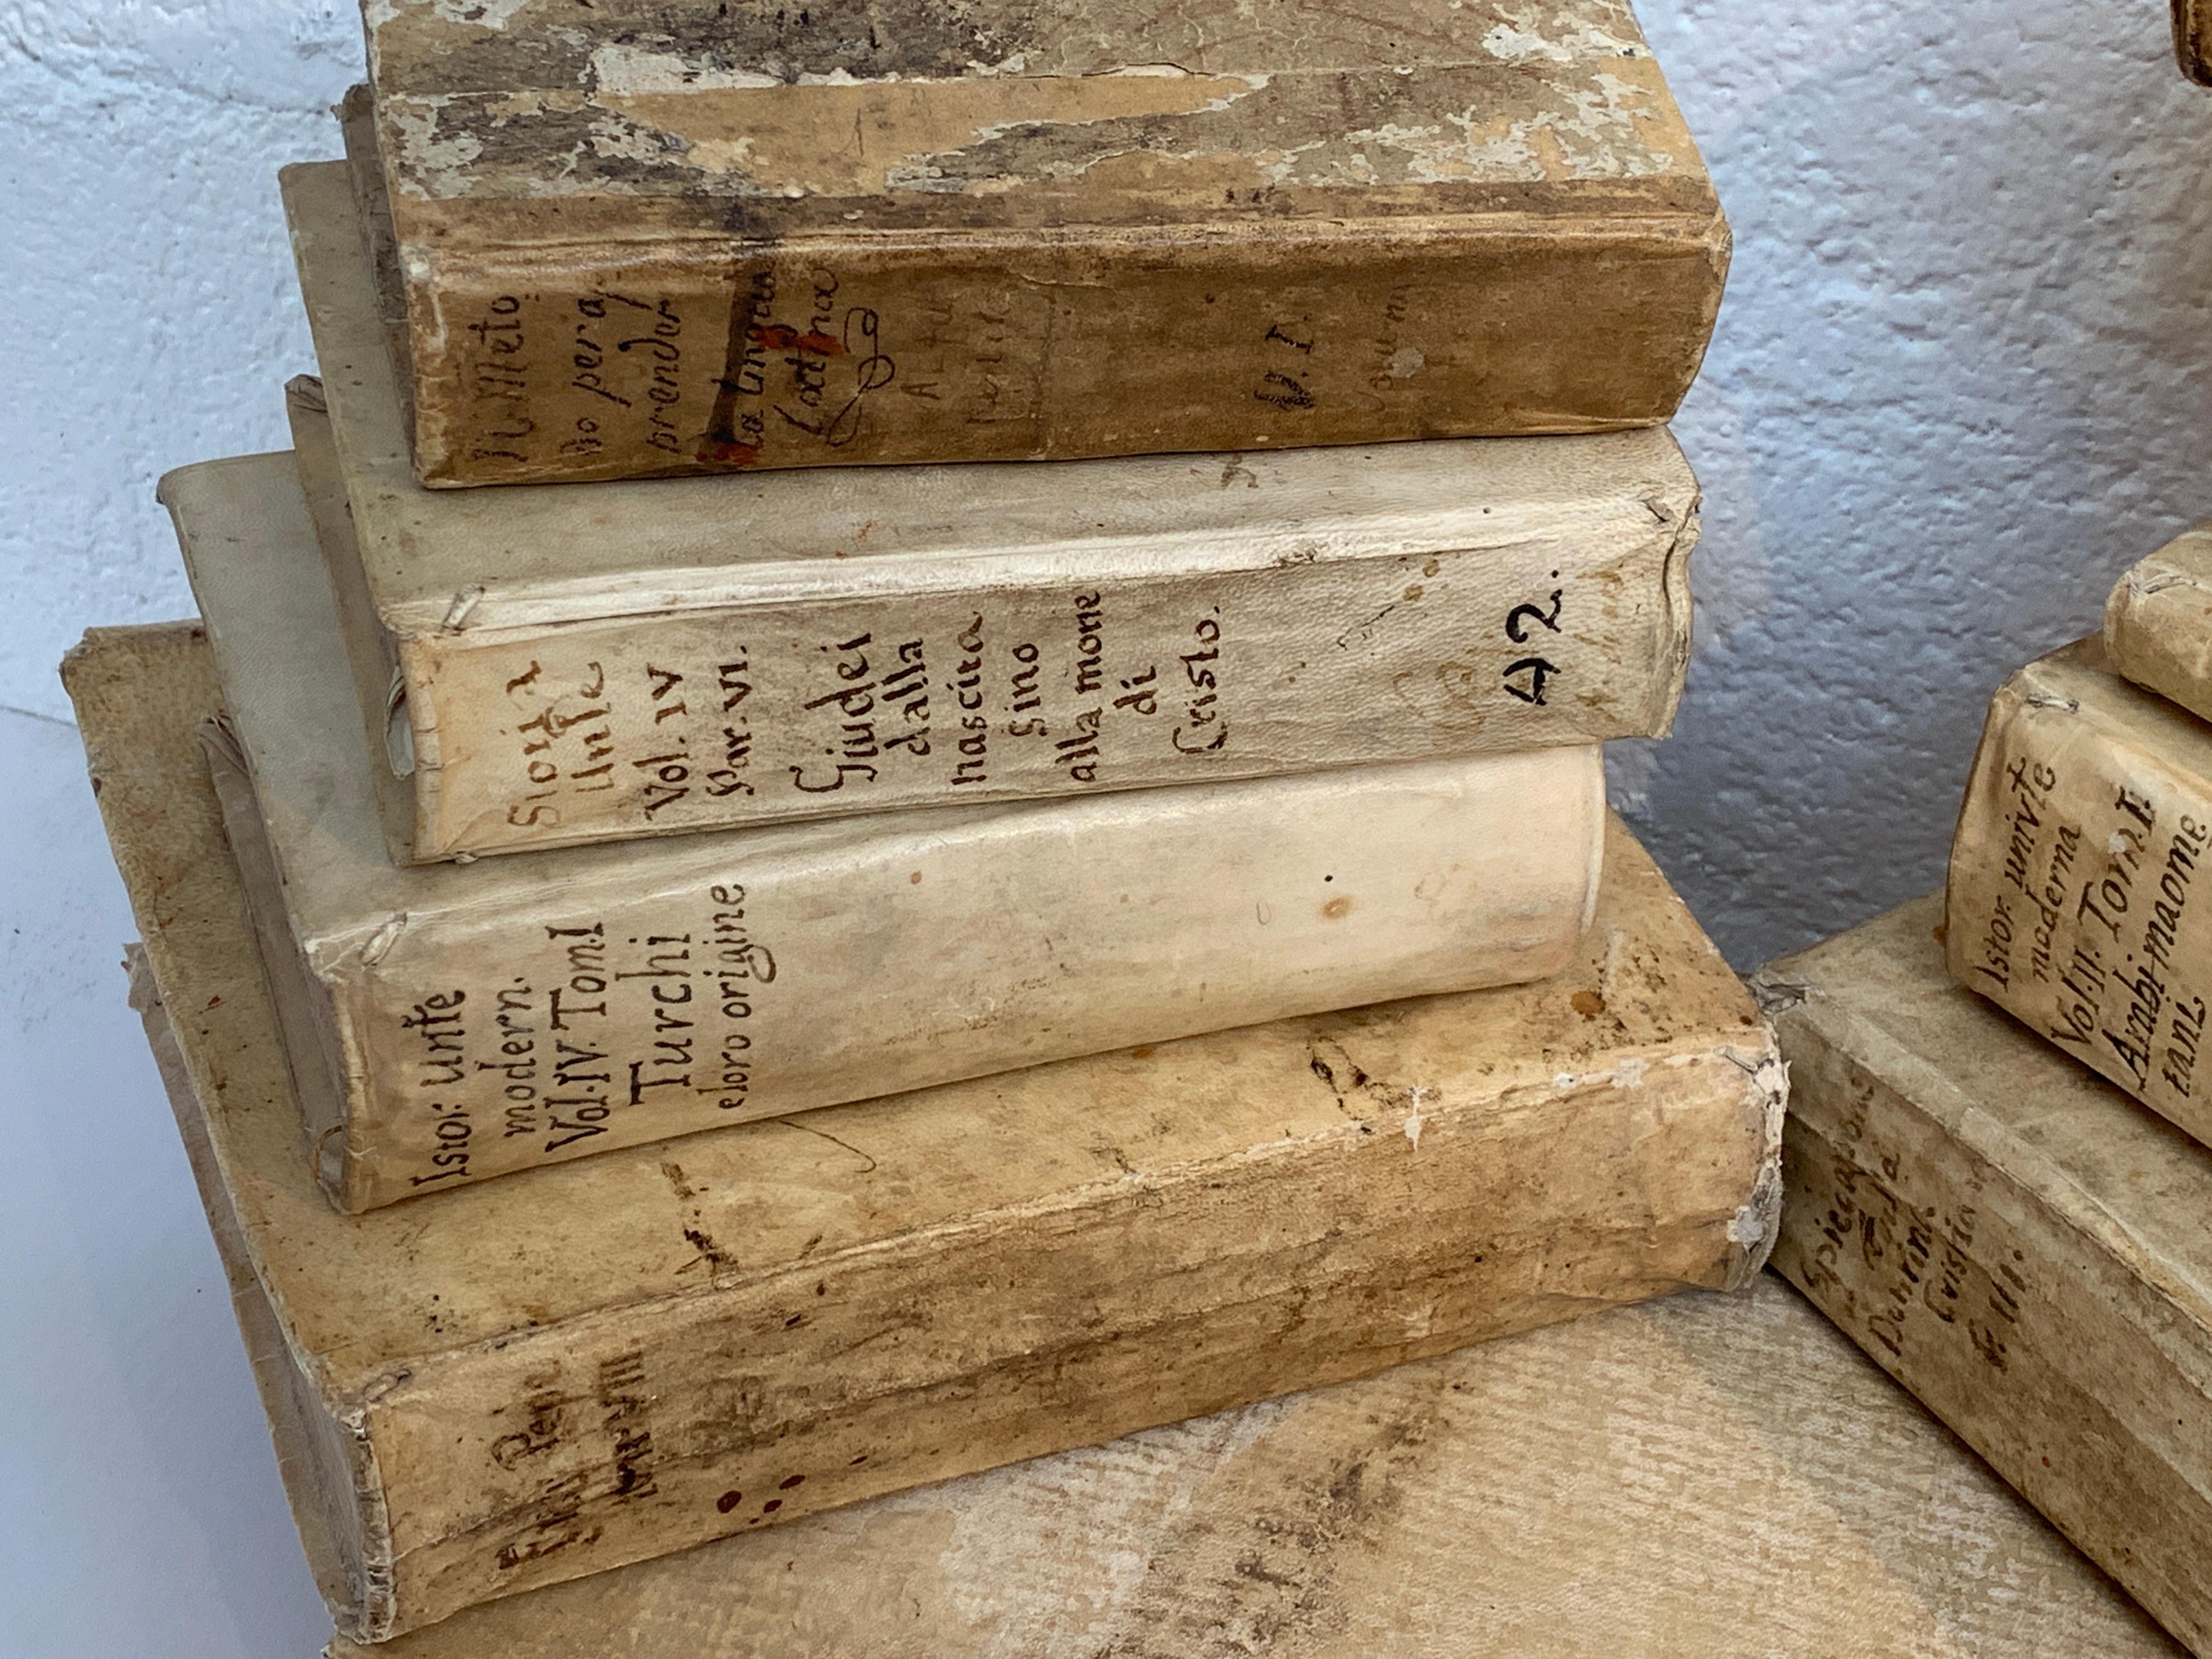 10 miscellaneous vellum covered texts. These date from the 18th and 19th centuries and range in size from 14 x 9 inches the largest and 7 x 4 to the smallest. They are in various stages of wear and imperfections, which we have tried to detail in the